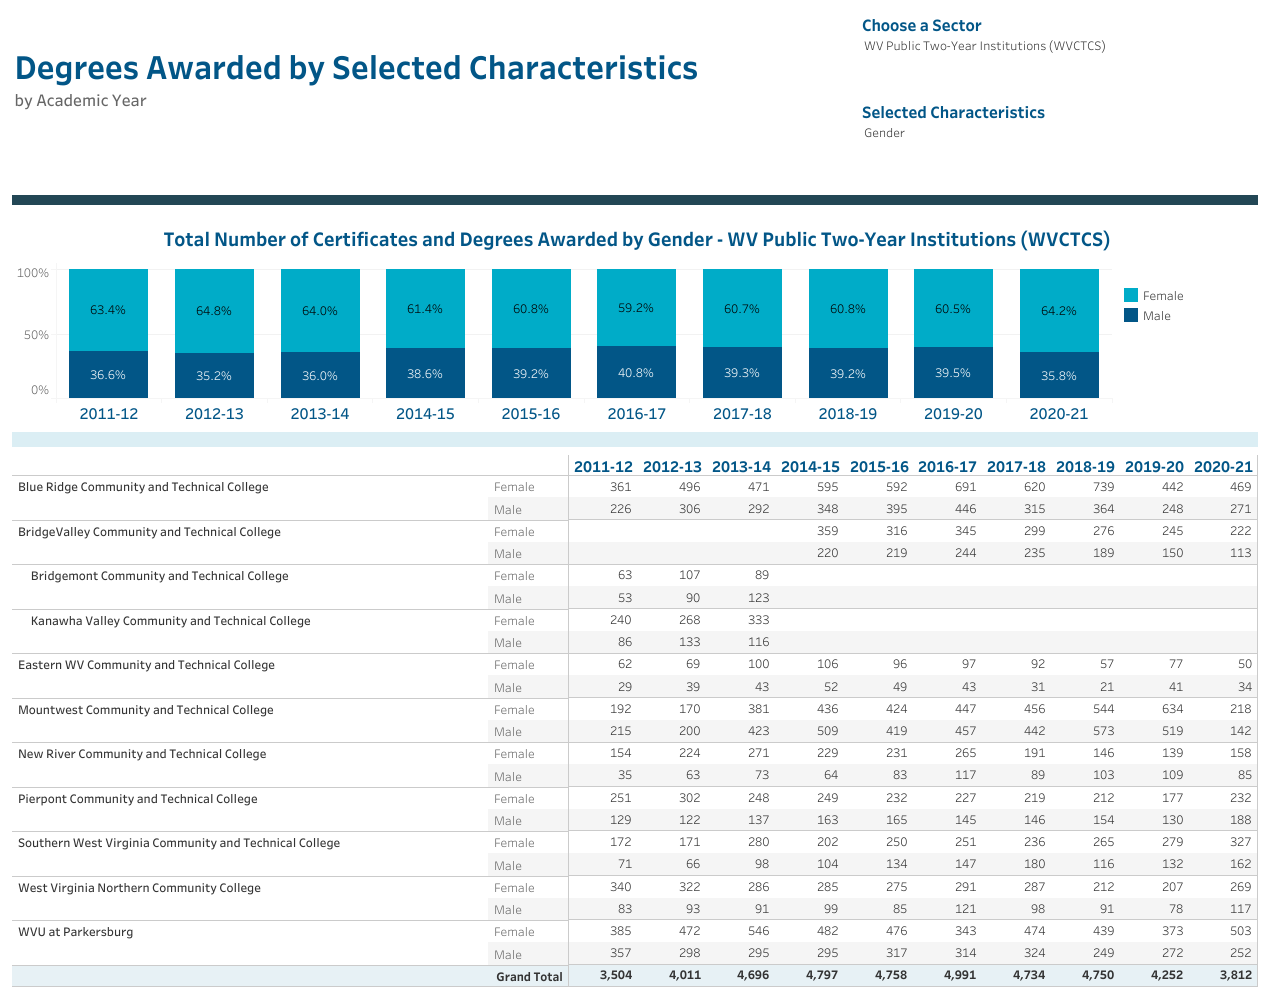 Degrees Awarded by Selected Characteristics (By Academic Year)